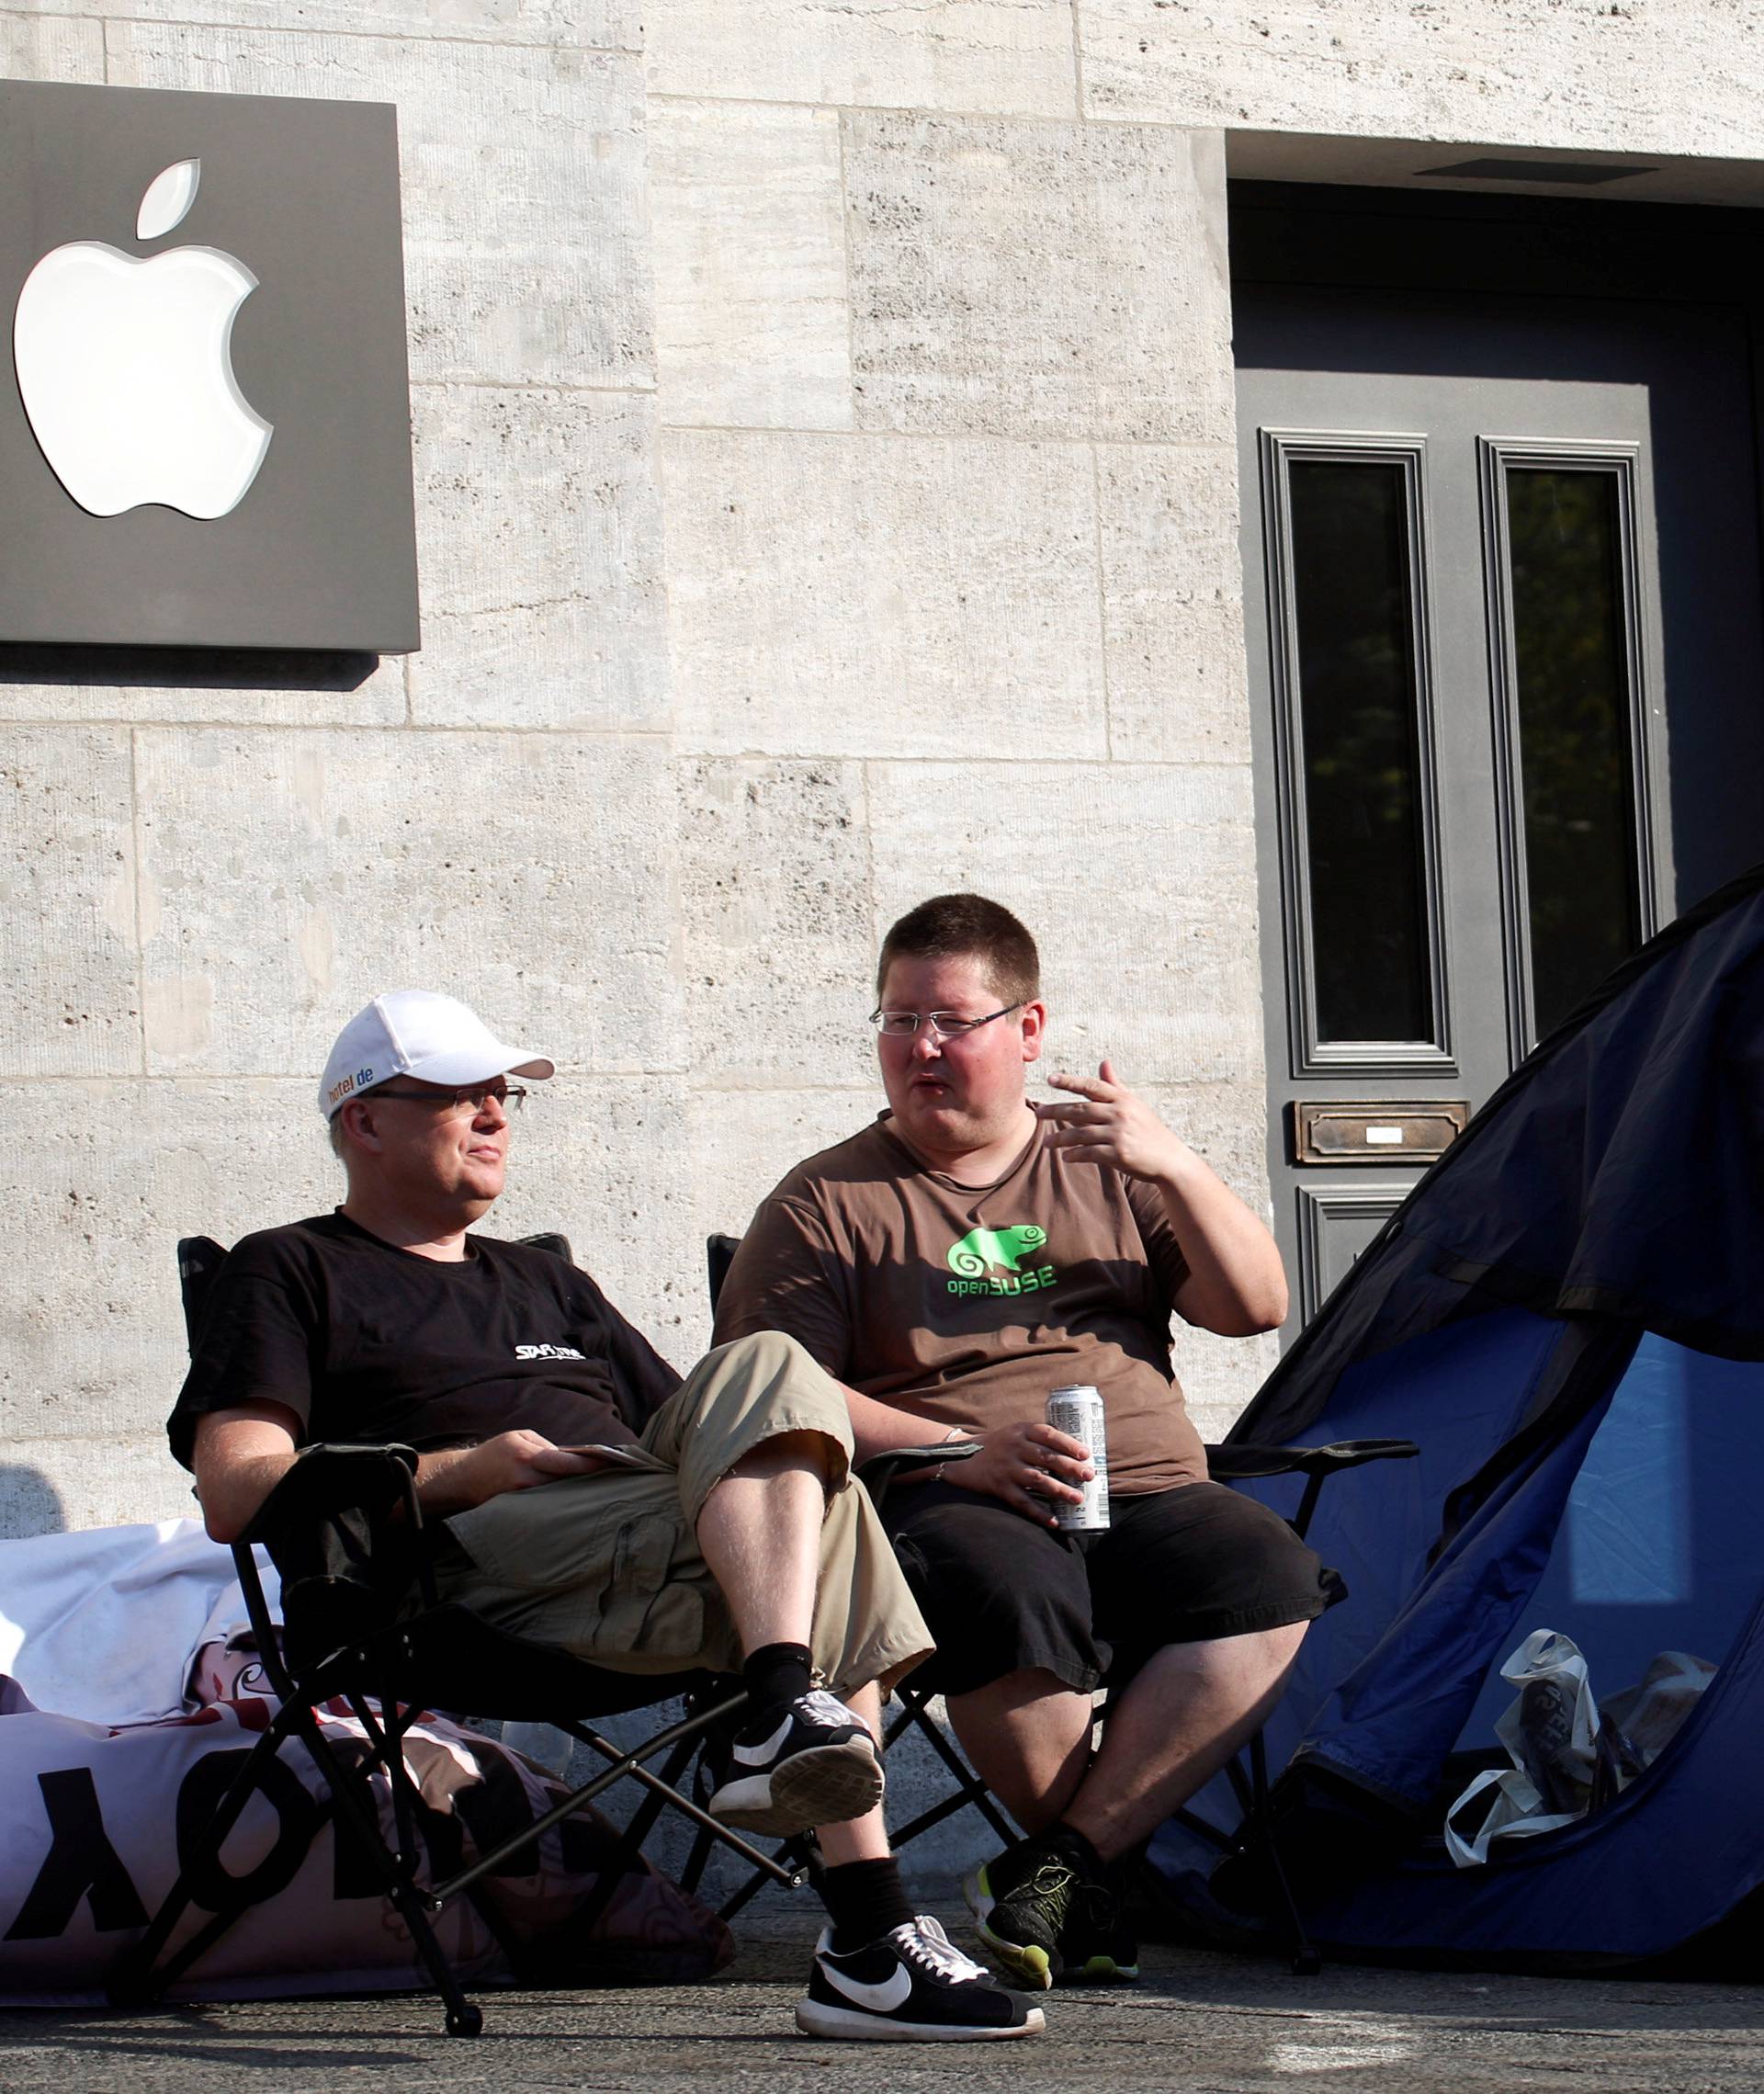 Customers wait beside their tents outside an Apple store to buy the newly released Apple iPhone 7 in Berlin